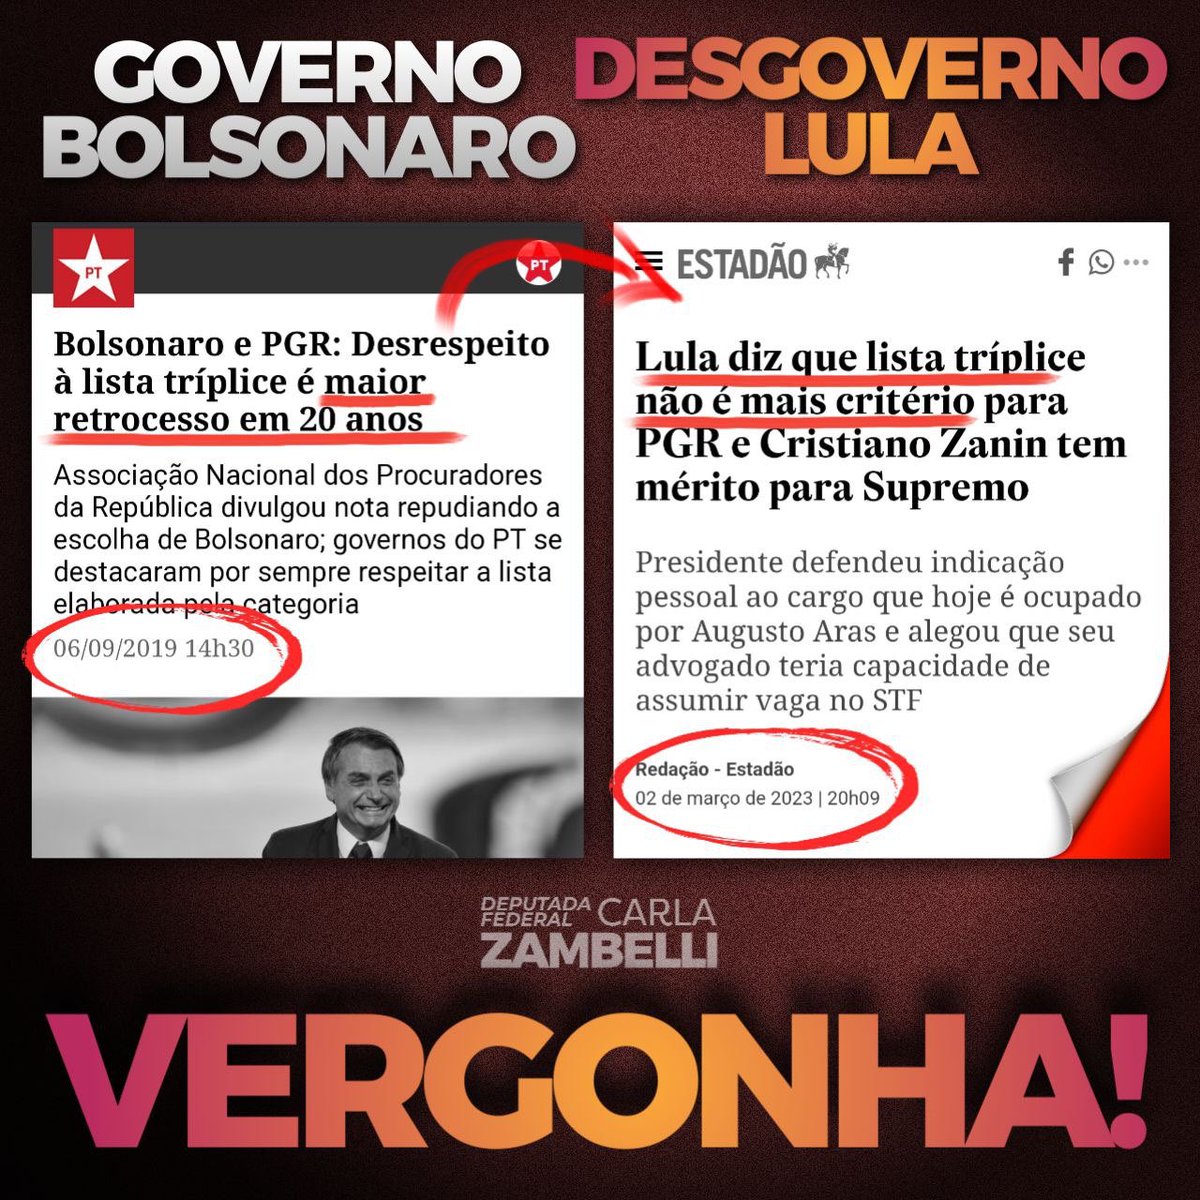 The propaganda once again wins the misinformed population. It is time to learn the truth and stop propaganda in government campaigns! #BrazilianSpring #DemocraciaAbalada